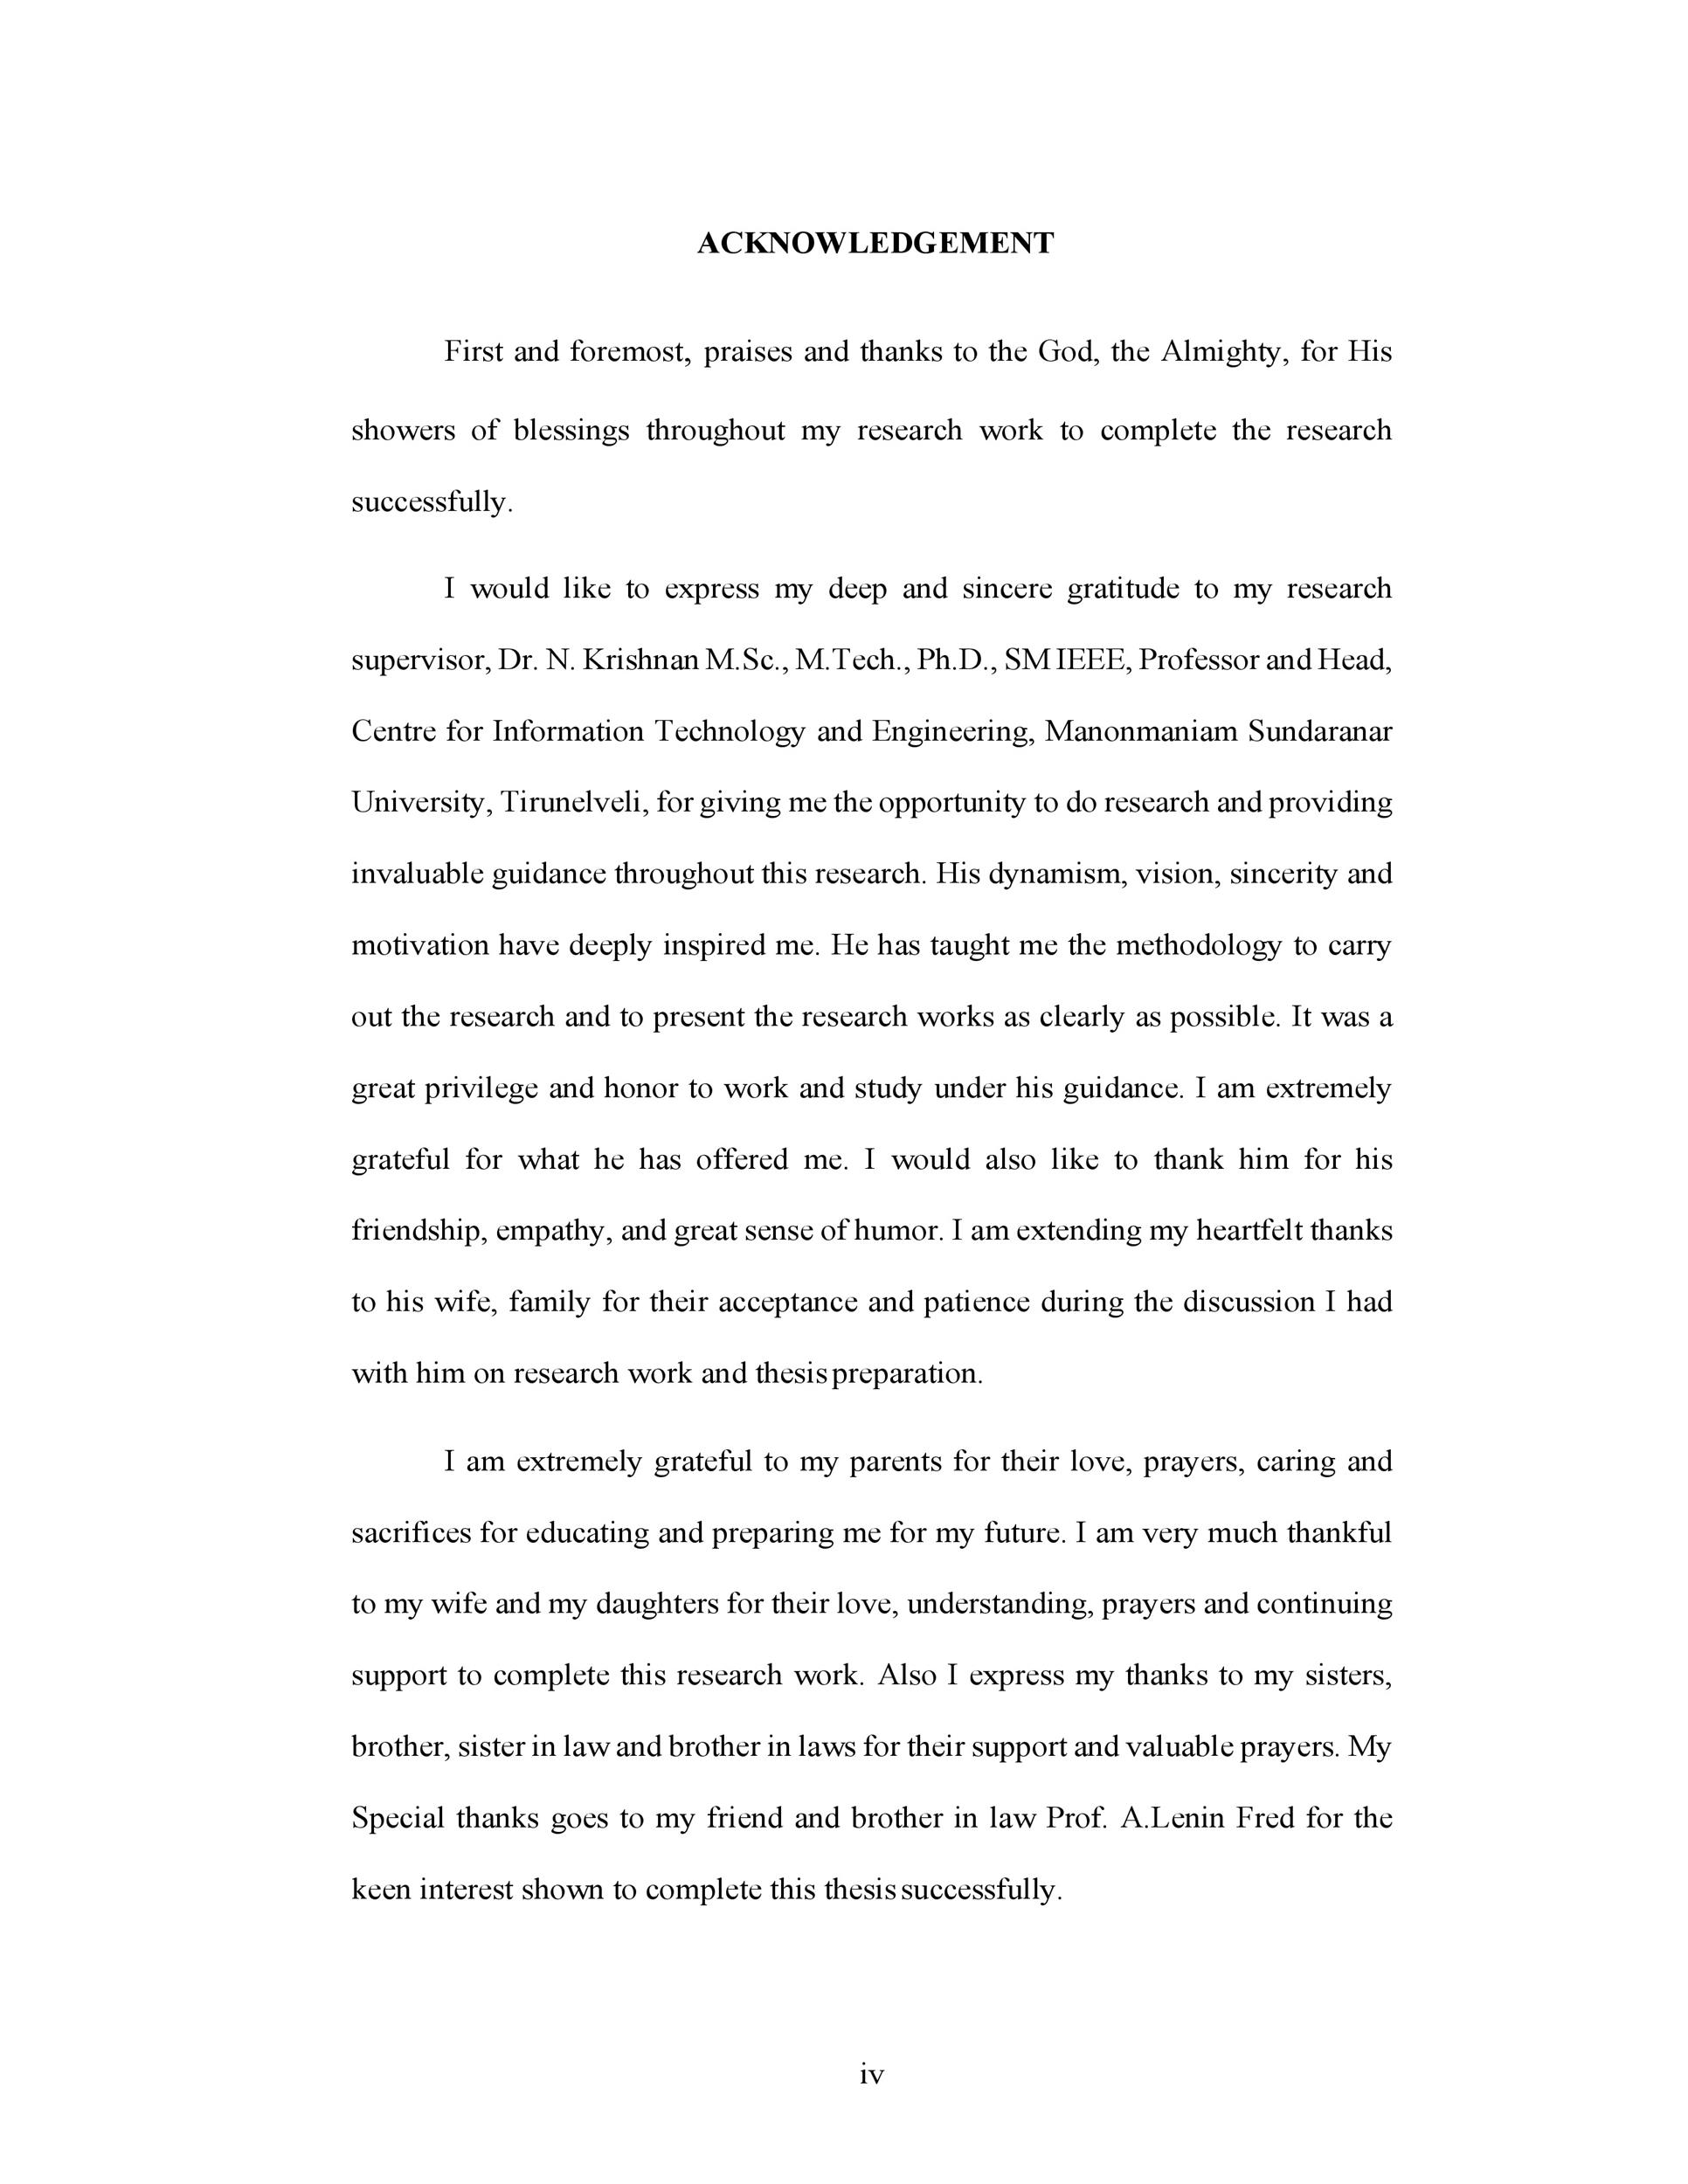 how to write acknowledgement in research paper